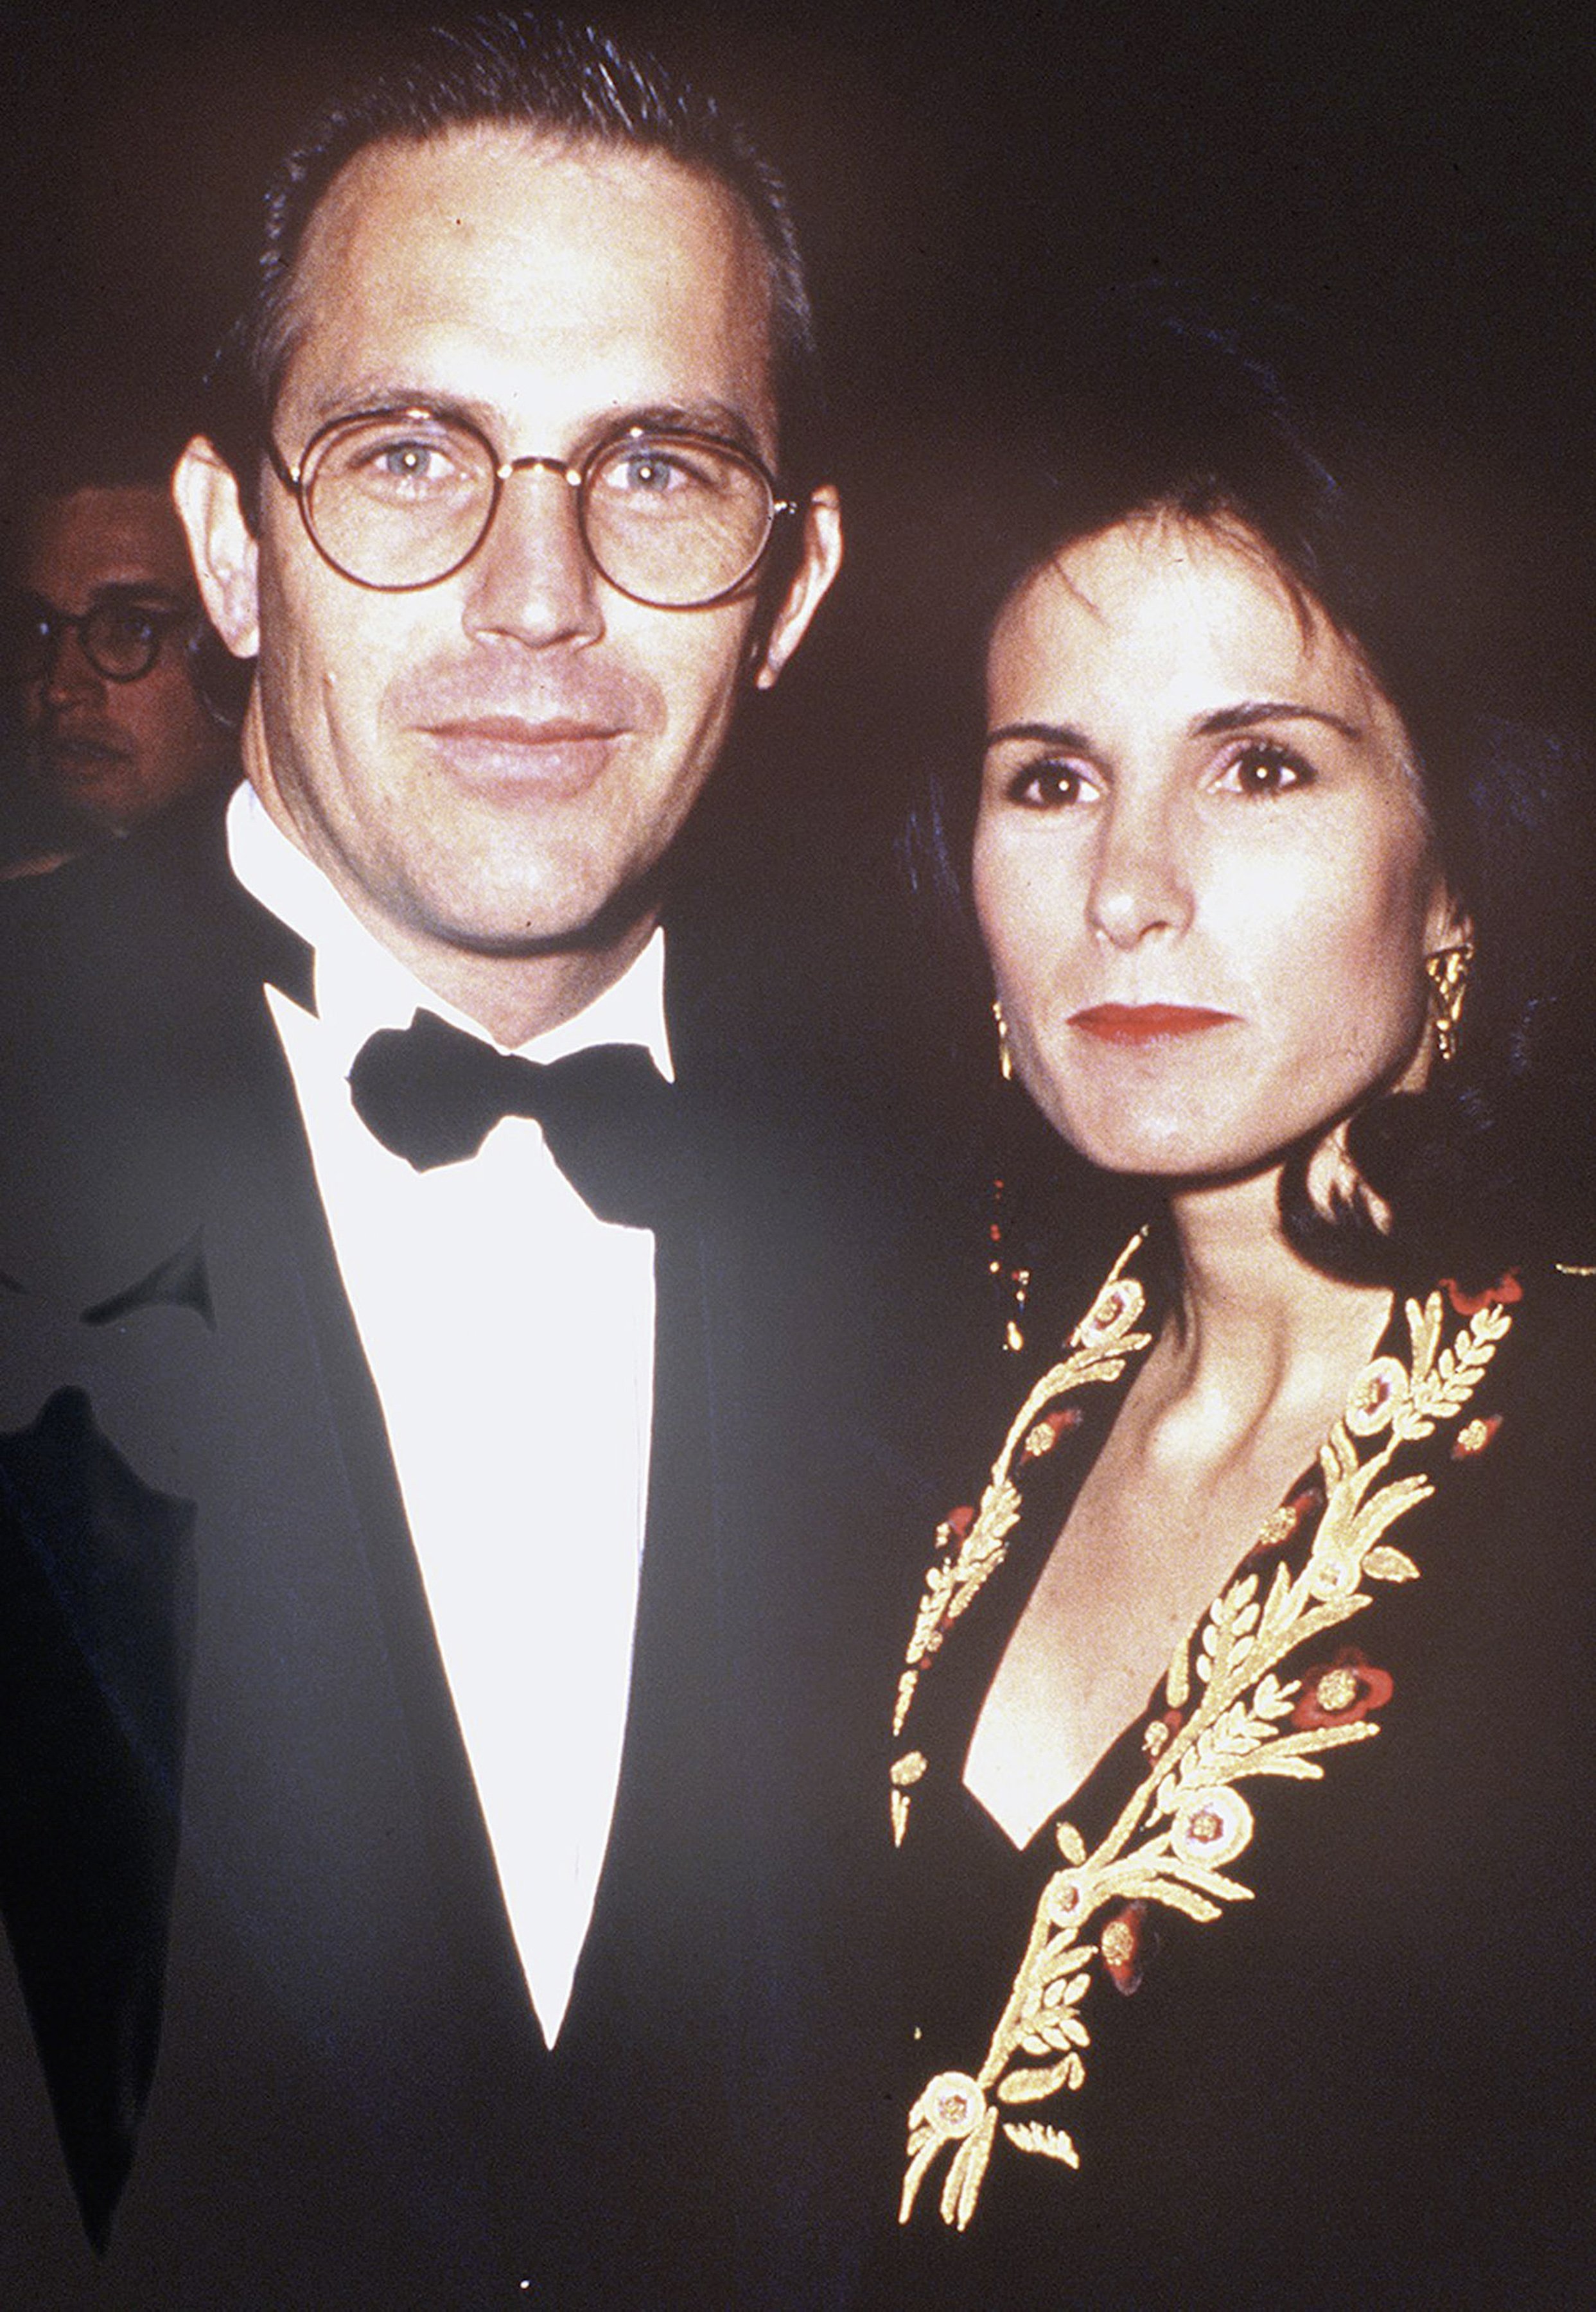 Kevin Costner and Cindy Silva at the "Dances With Wolves" Los Angeles premiere in California, on November 4, 1990. | Source: Getty Images